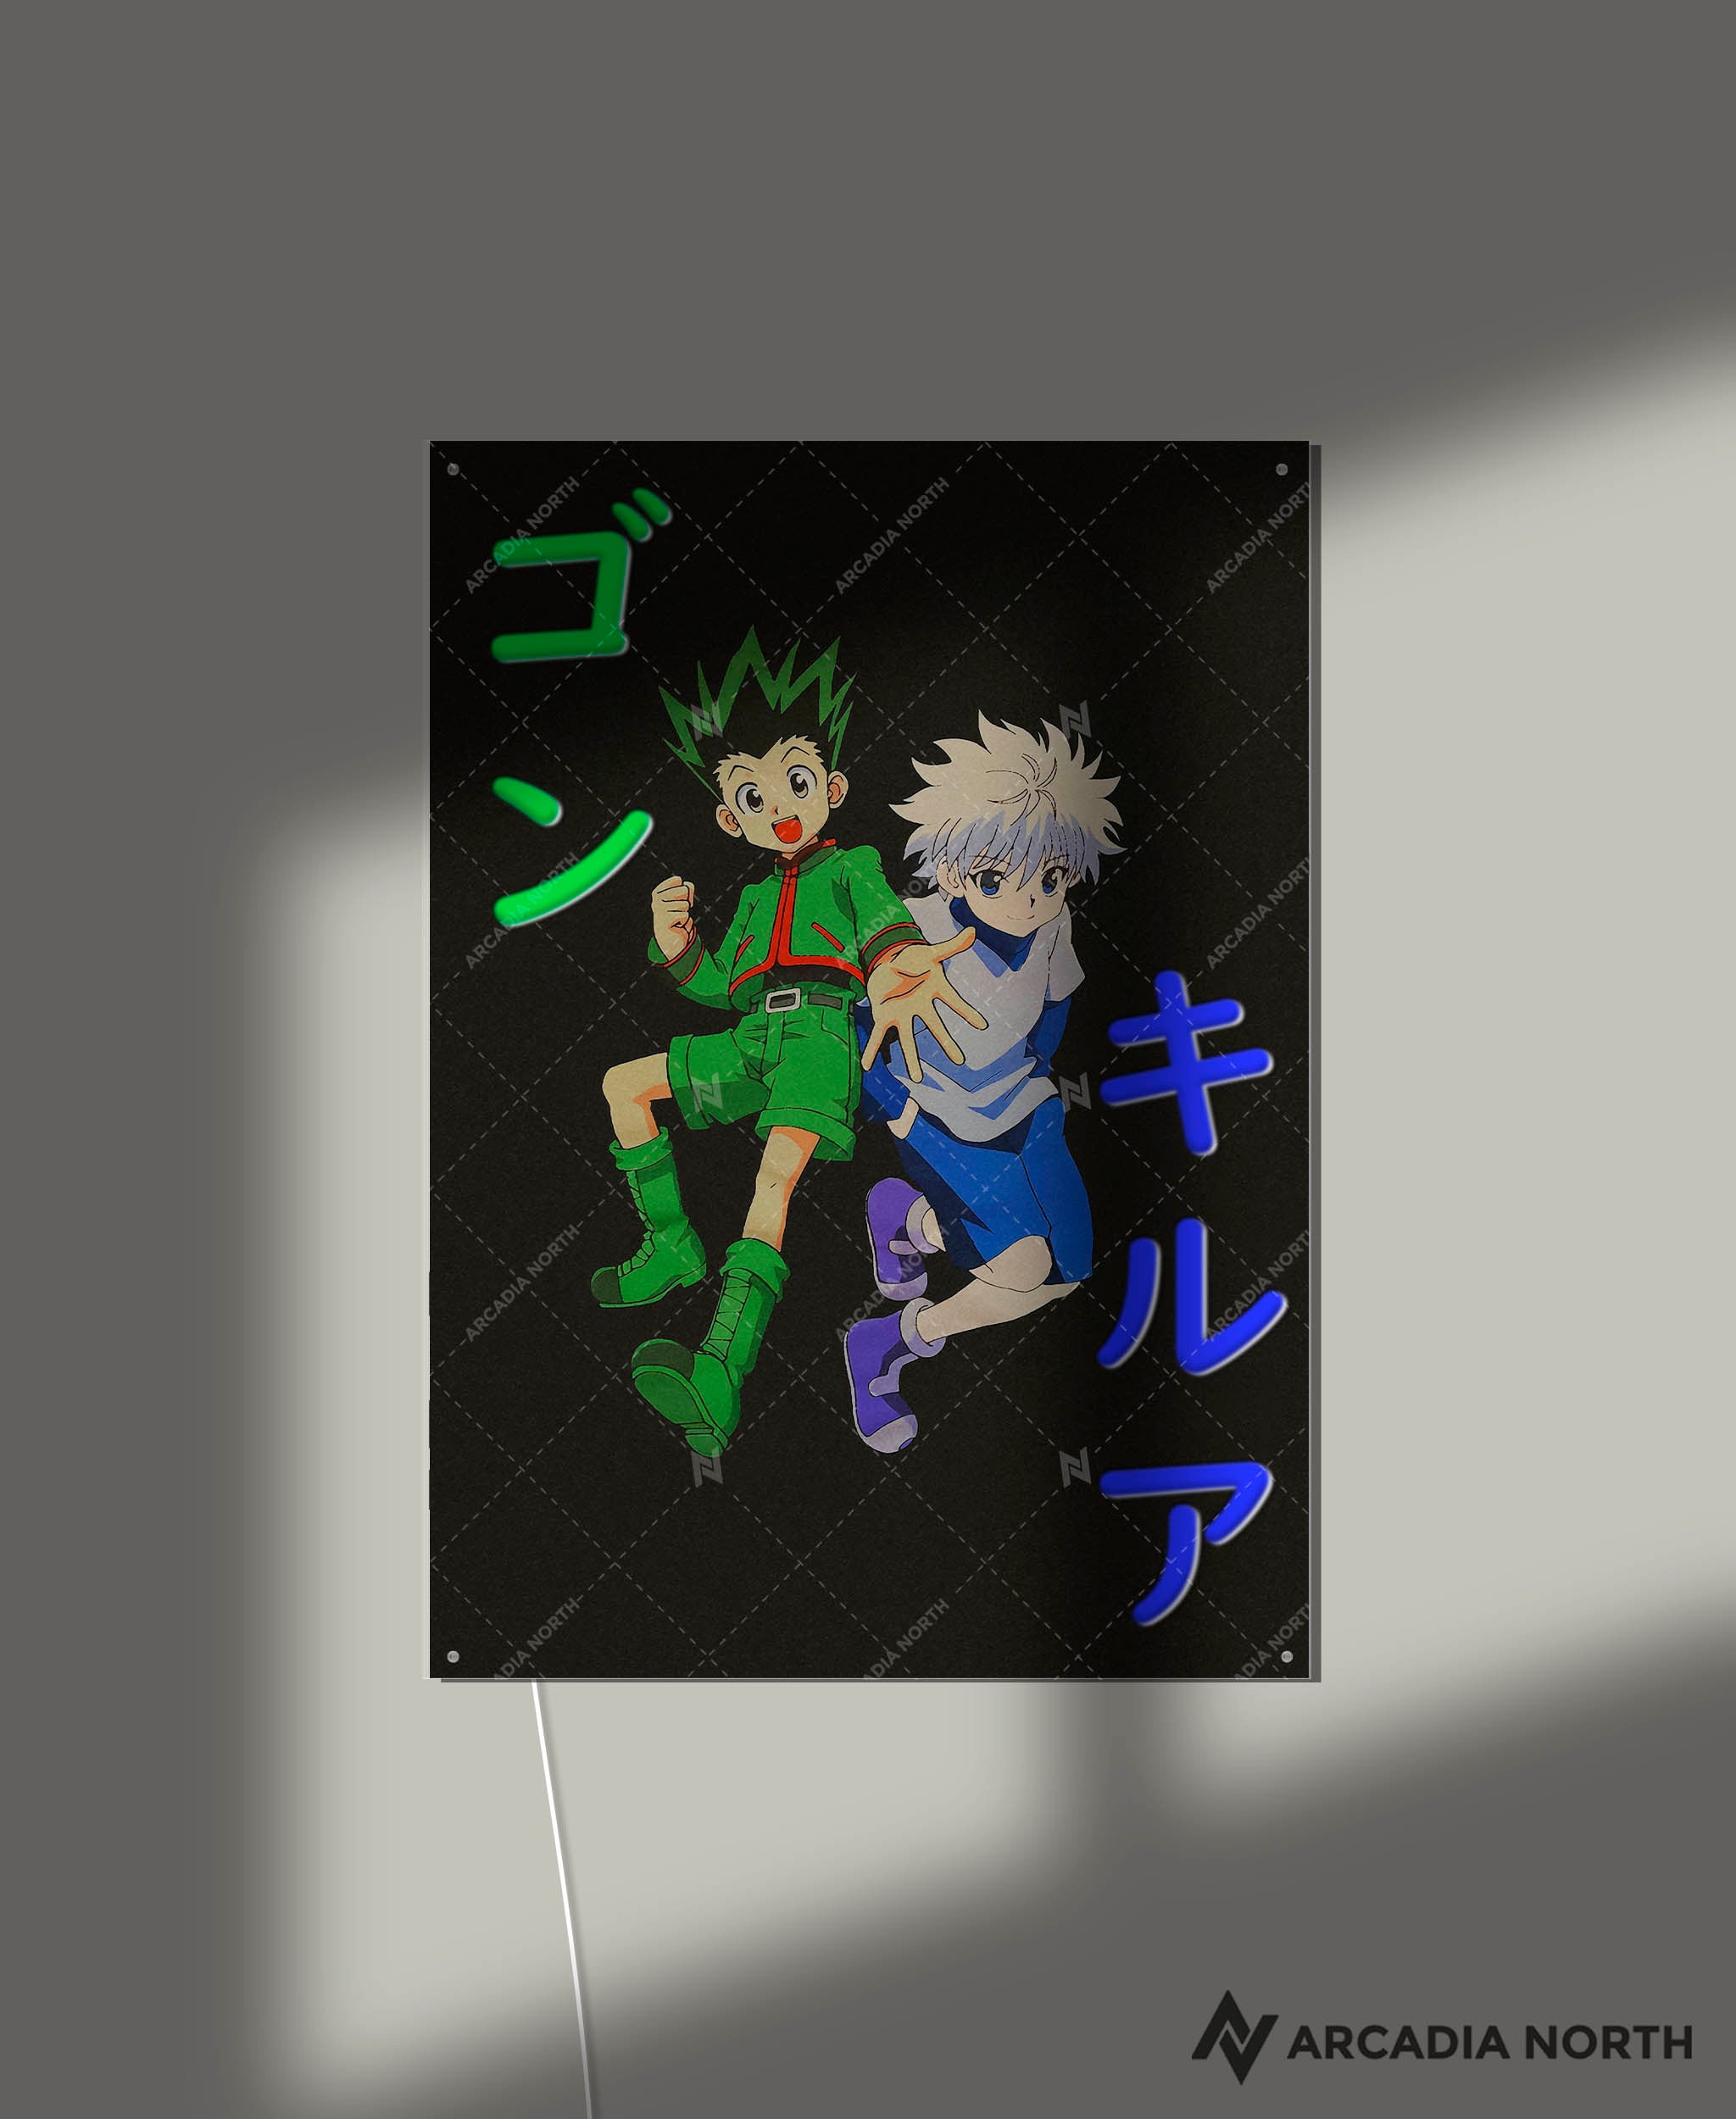 Arcadia North AURALIGHT - an LED Poster featuring the anime Hunter x Hunter with Gon and Killua and their names written in Japanese Katakana [ゴン] and [キルア]. The names are illuminated by glowing LED neon lights that match each character’s main color. UV-printed poster on acrylic.